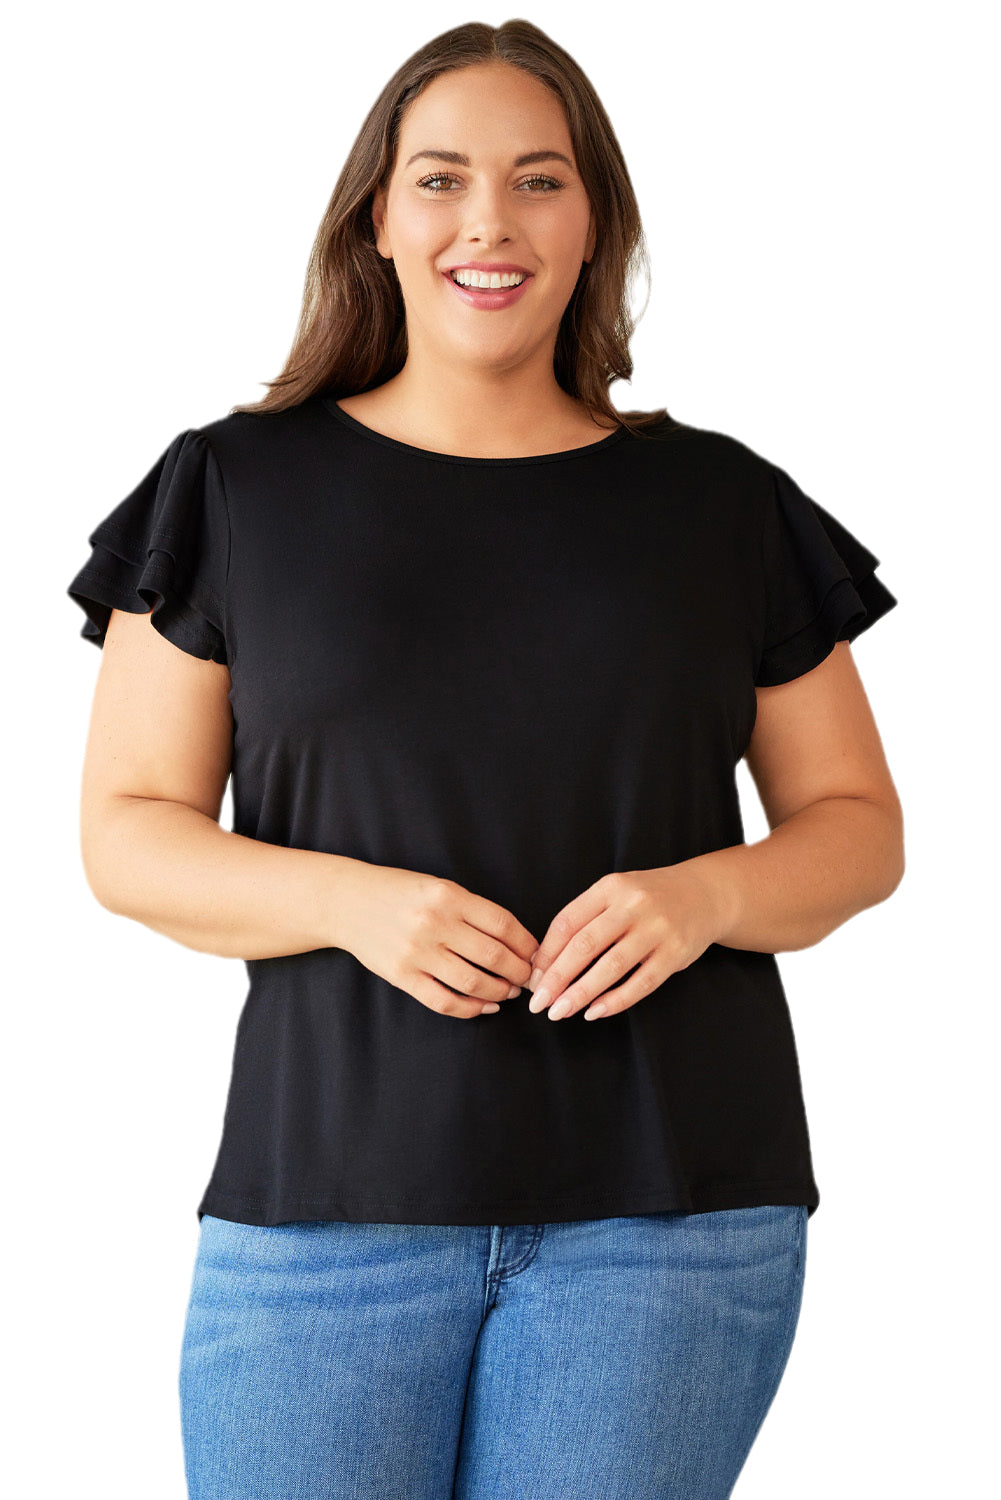 Black Plus Size Solid Color Ruffled Short Sleeve Top